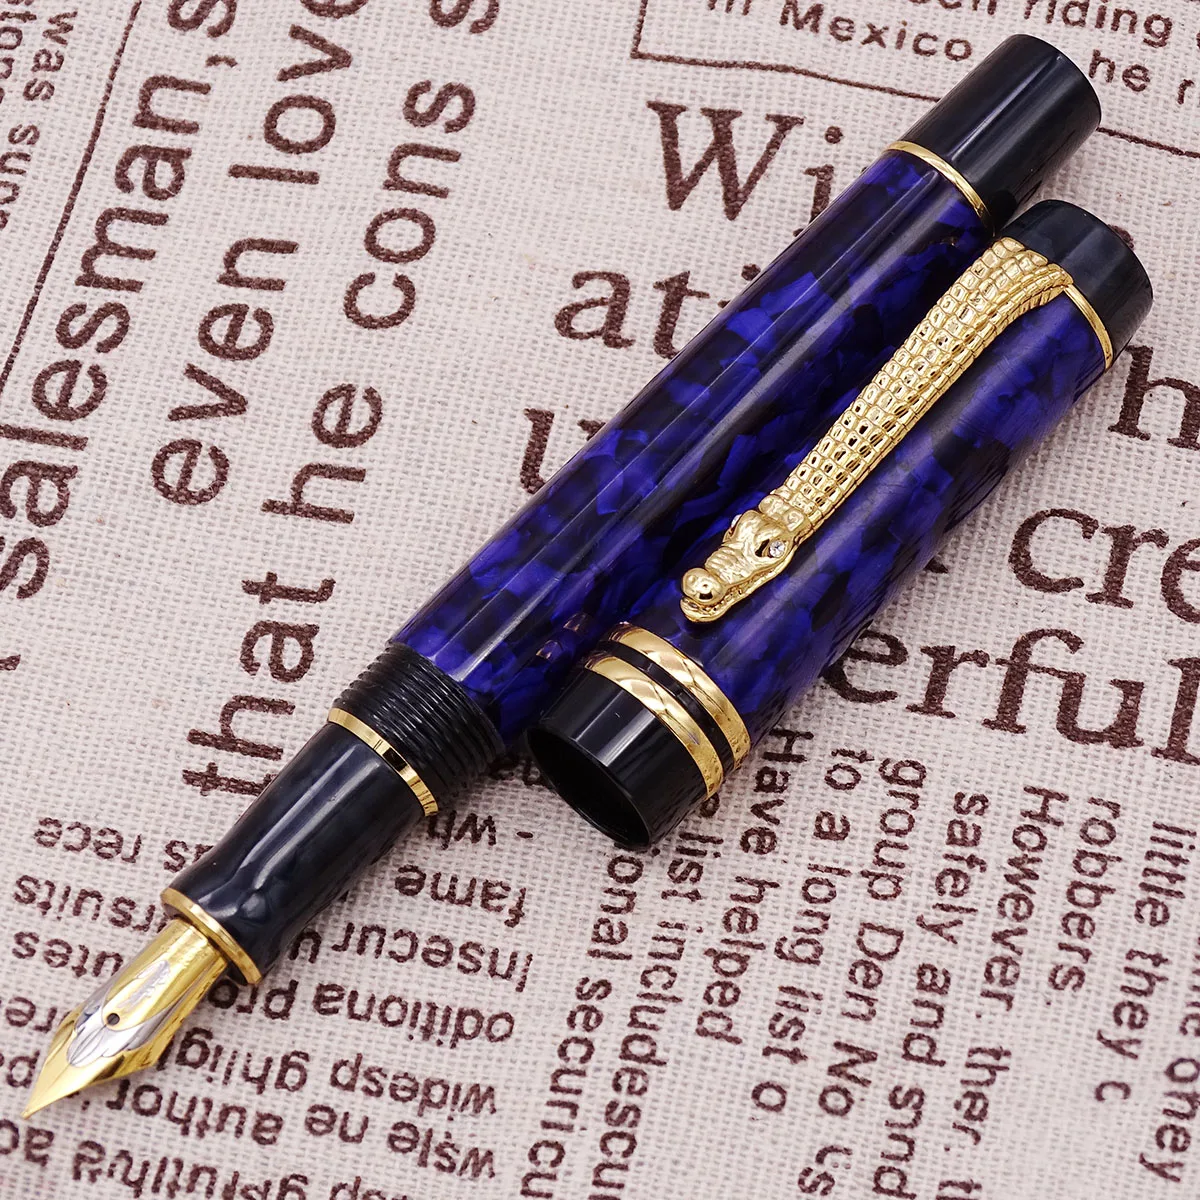 Crocodile Marble Celluloid Fountain Pen 22KGP Medium Nib Writing Gift Pen, Blue Flowers Pattern Crocodile Clip Office Supplies sketch pencil set sketch charcoal soft medium hard art painting drawing tools professional sketch hand drawing art supplies full